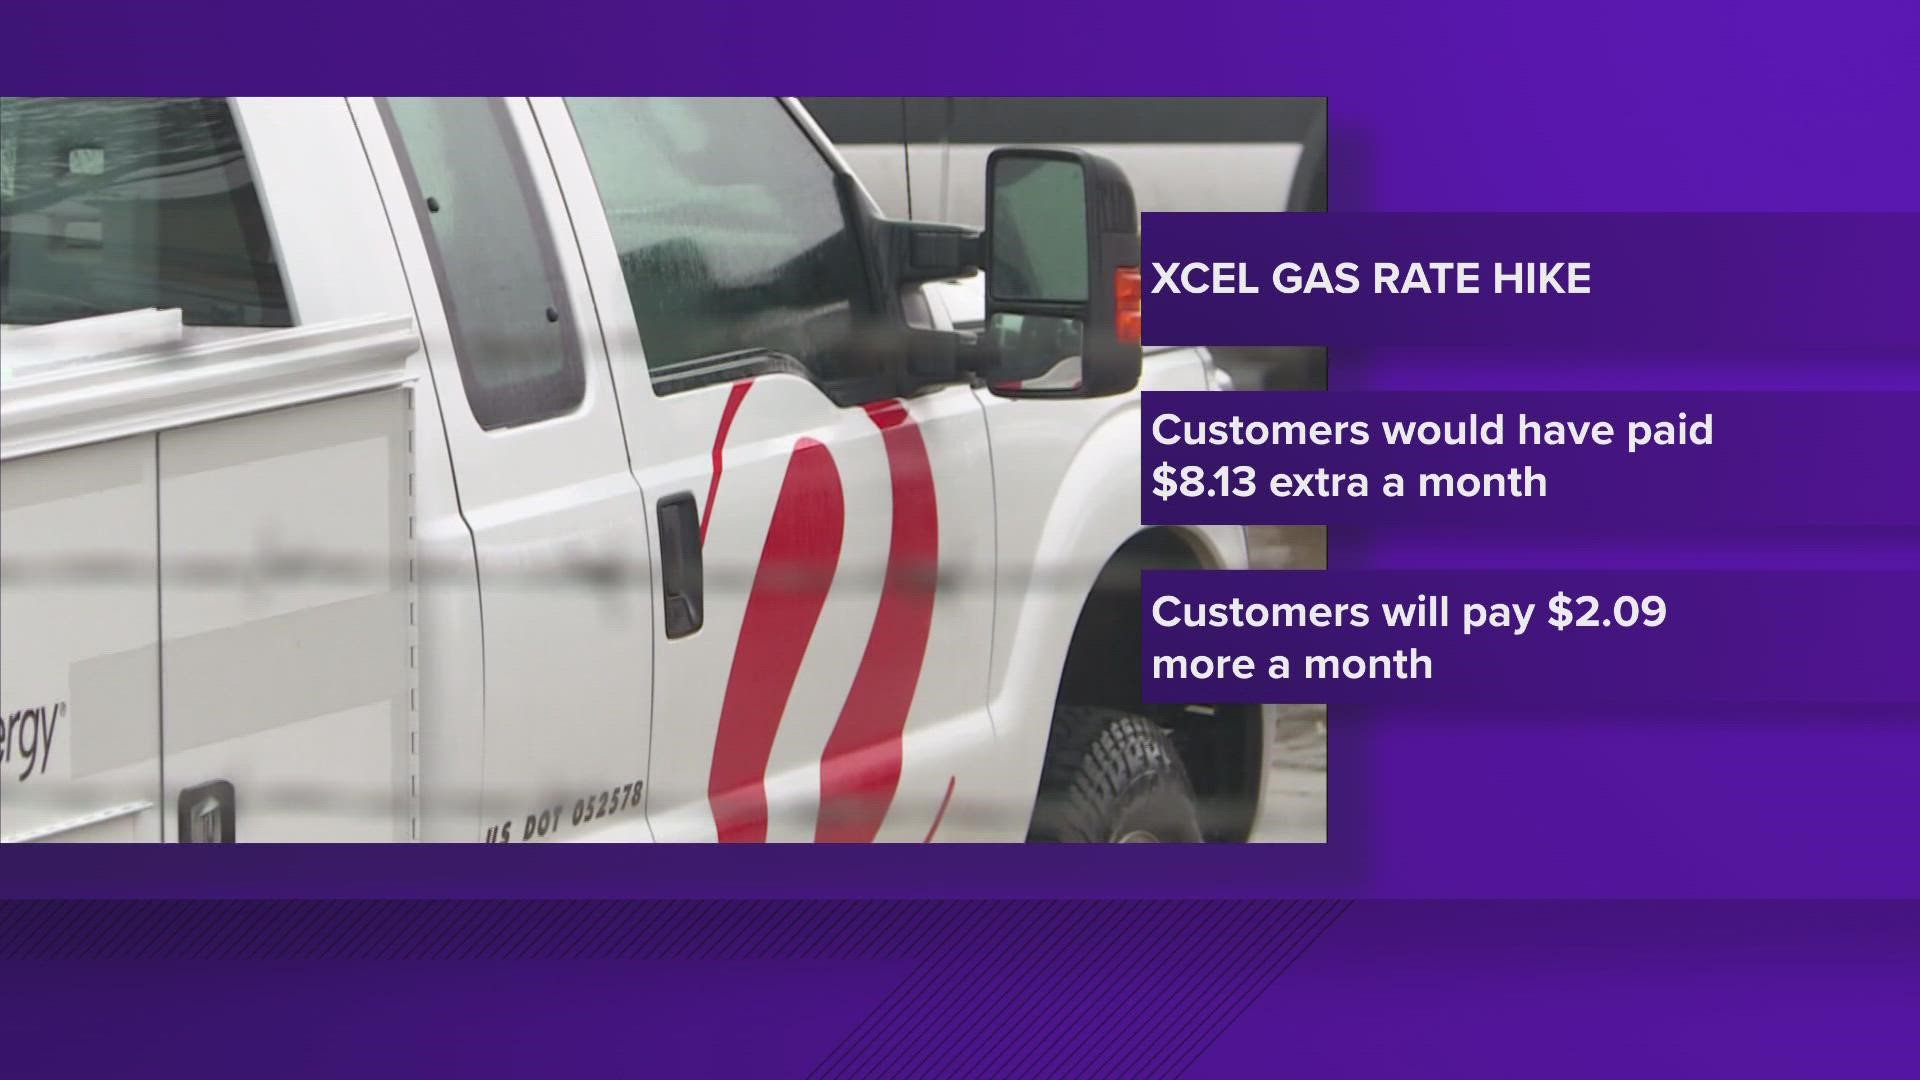 Customers will pay $2.09 more a month for electricity.